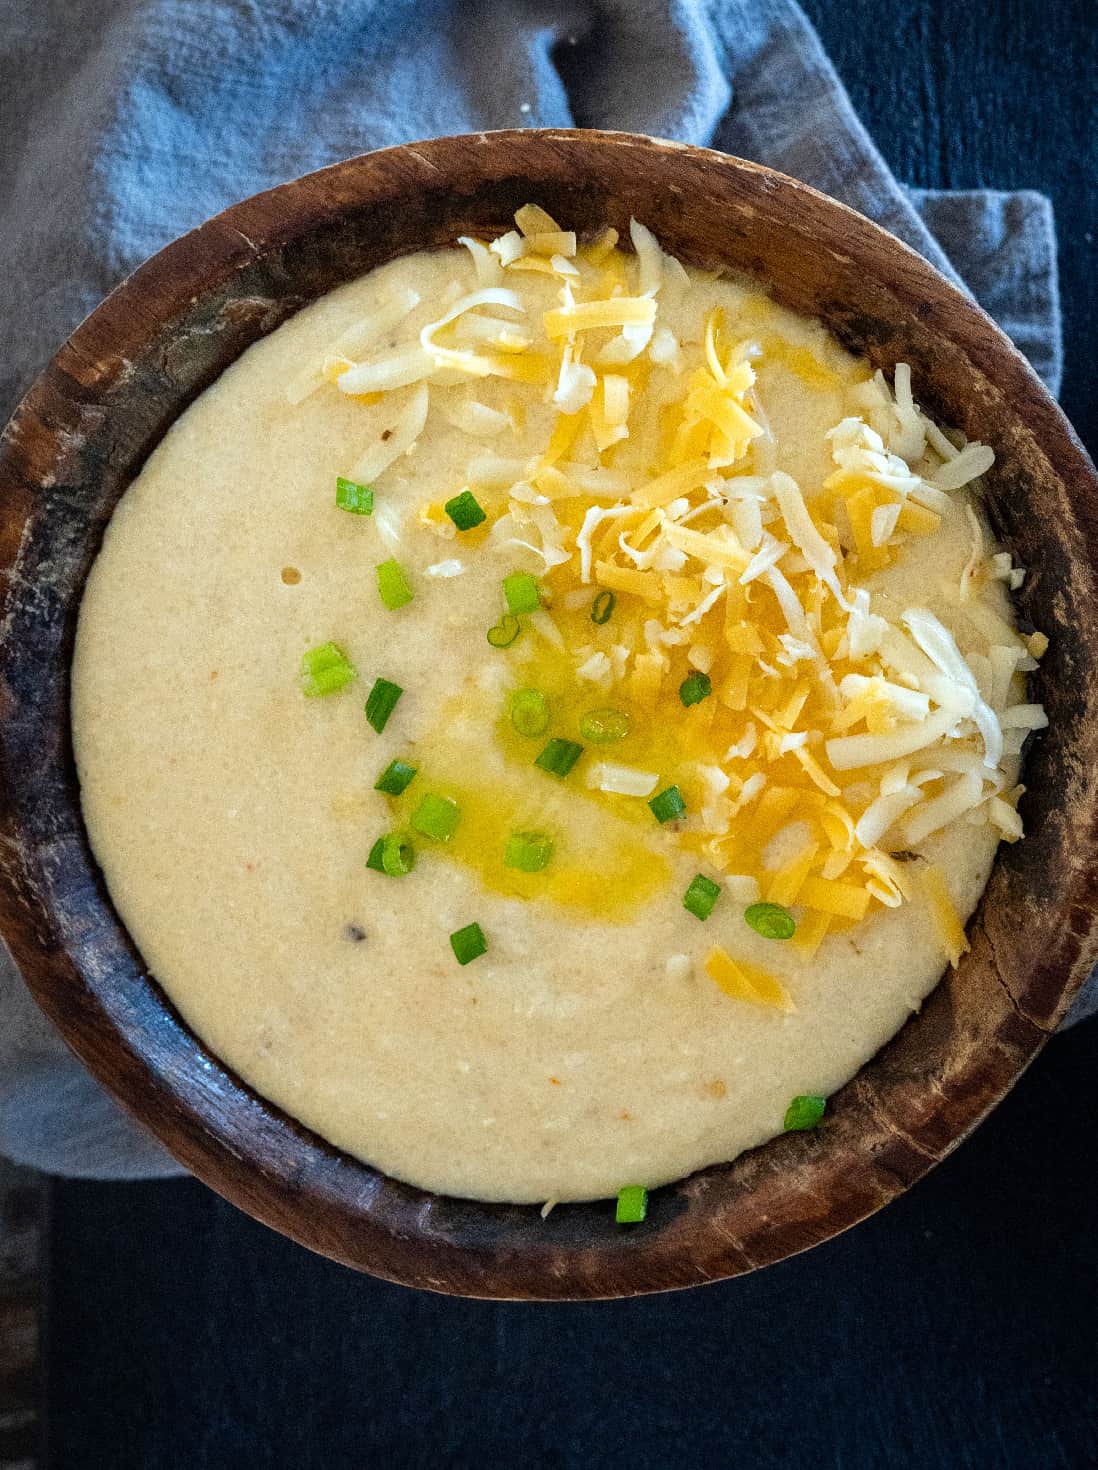 Bowl of cheese grits topped with shredded cheese and green onions.